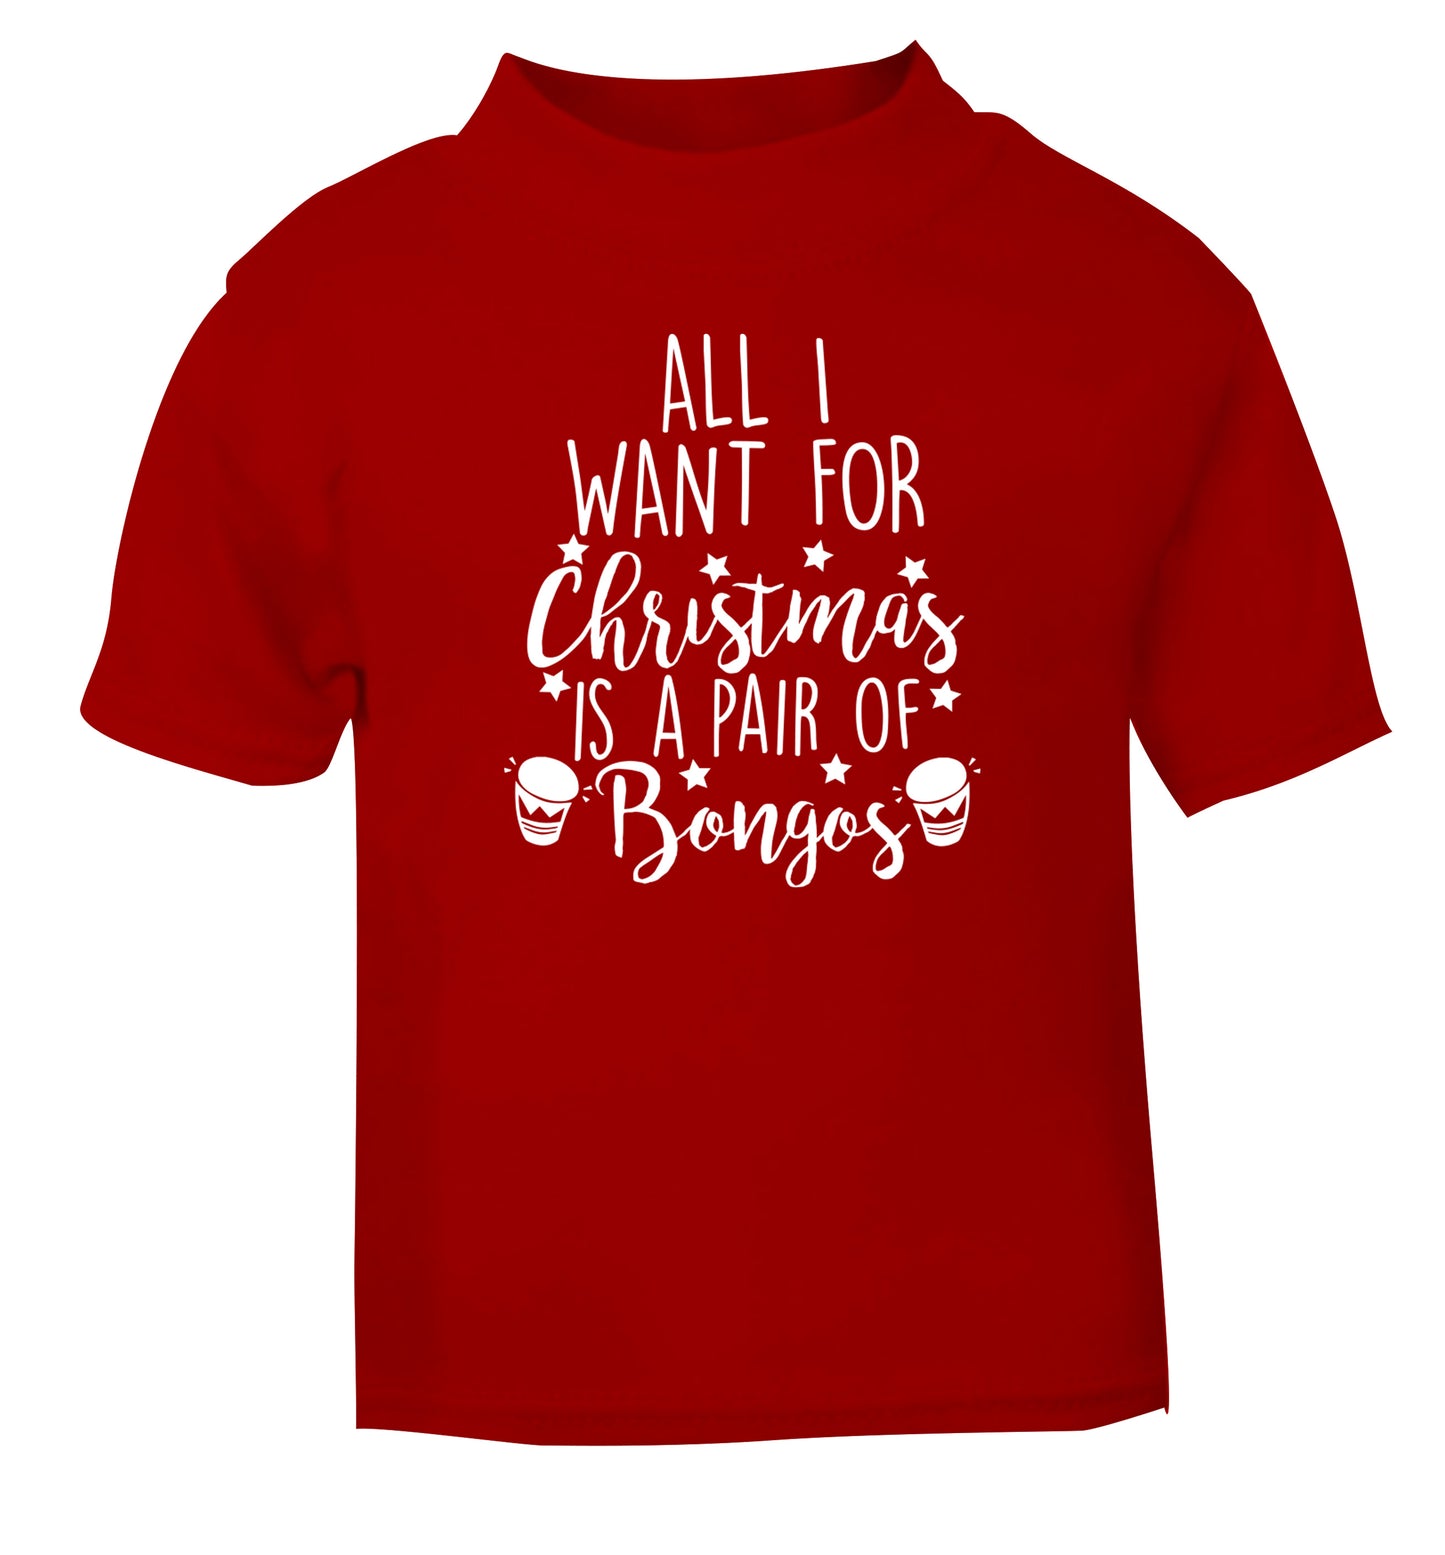 All I want for Christmas is a pair of bongos! red Baby Toddler Tshirt 2 Years